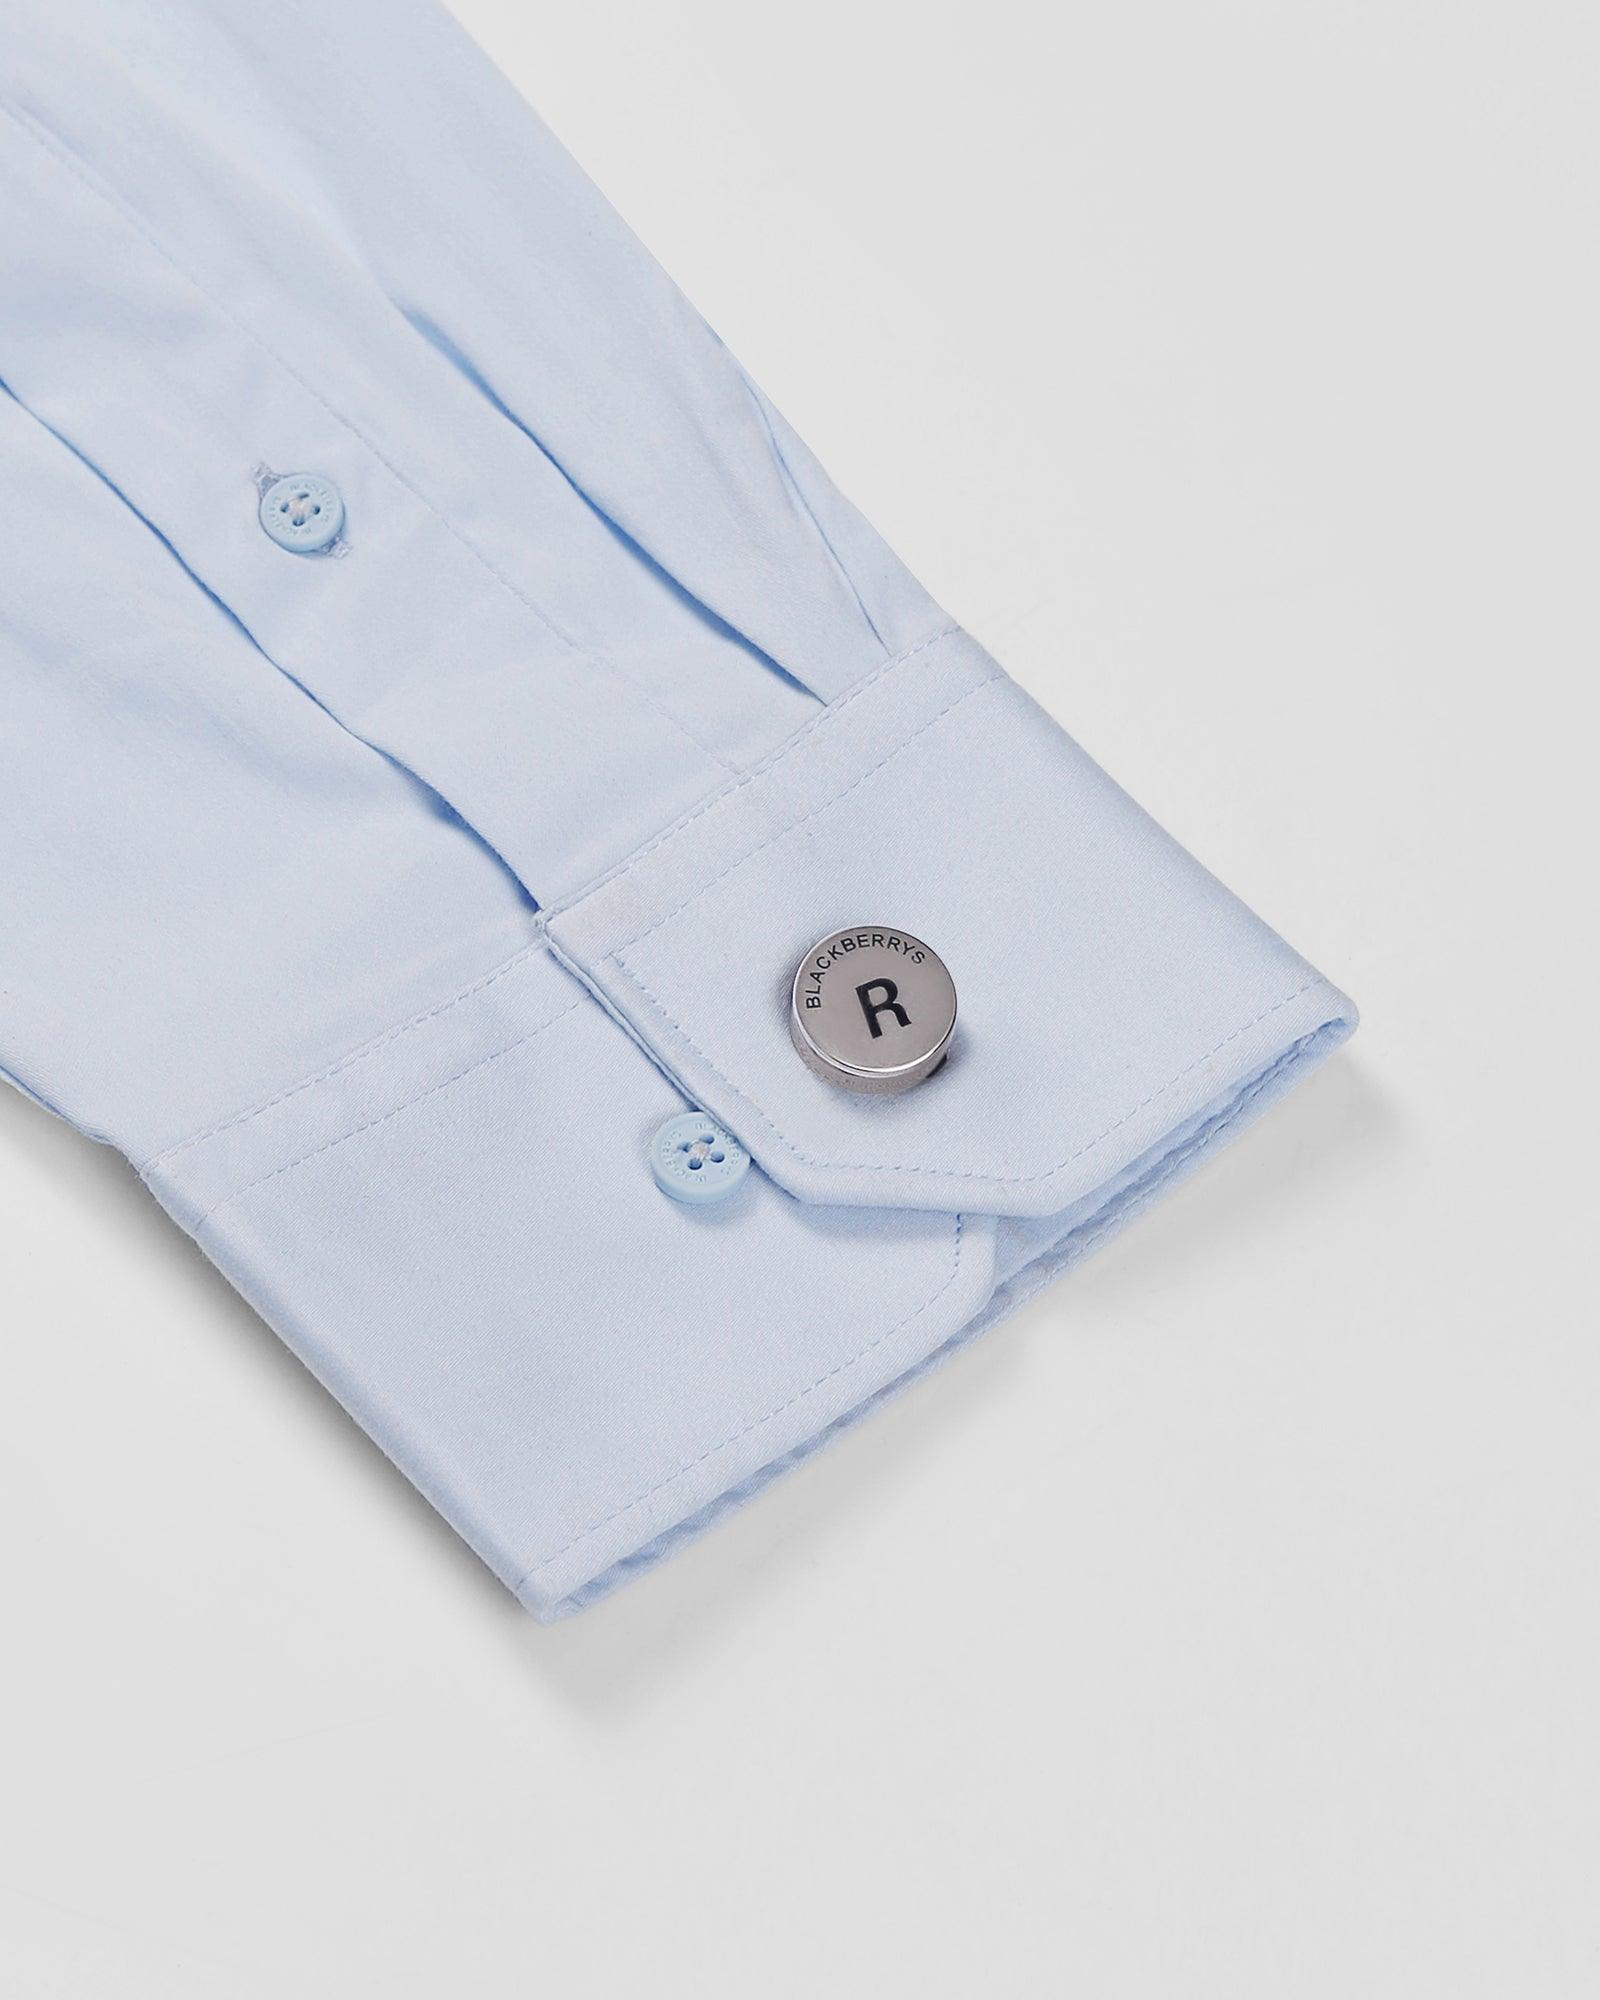 Personalised Shirt Button Cover With Alphabetic Initial-R - Blackberrys